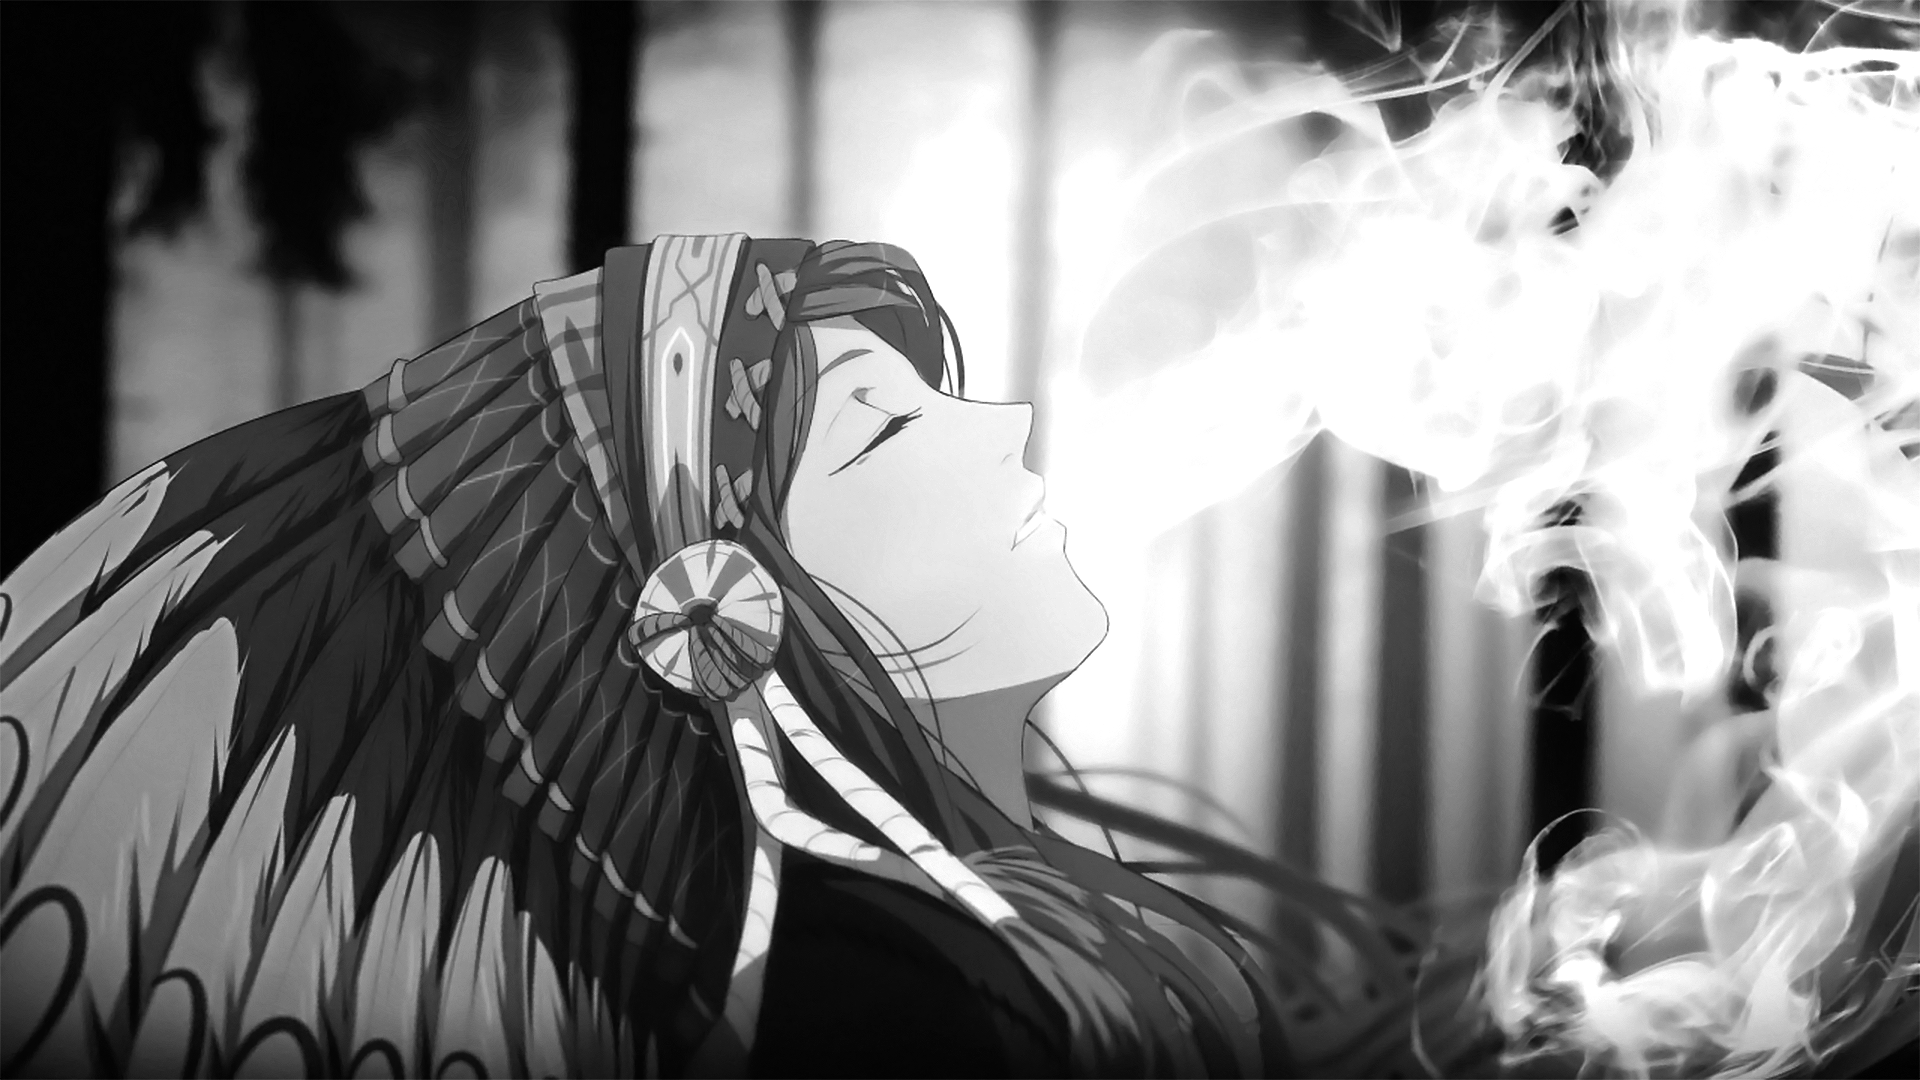 Anime Girl Black And White Wallpapers - Wallpaper Cave